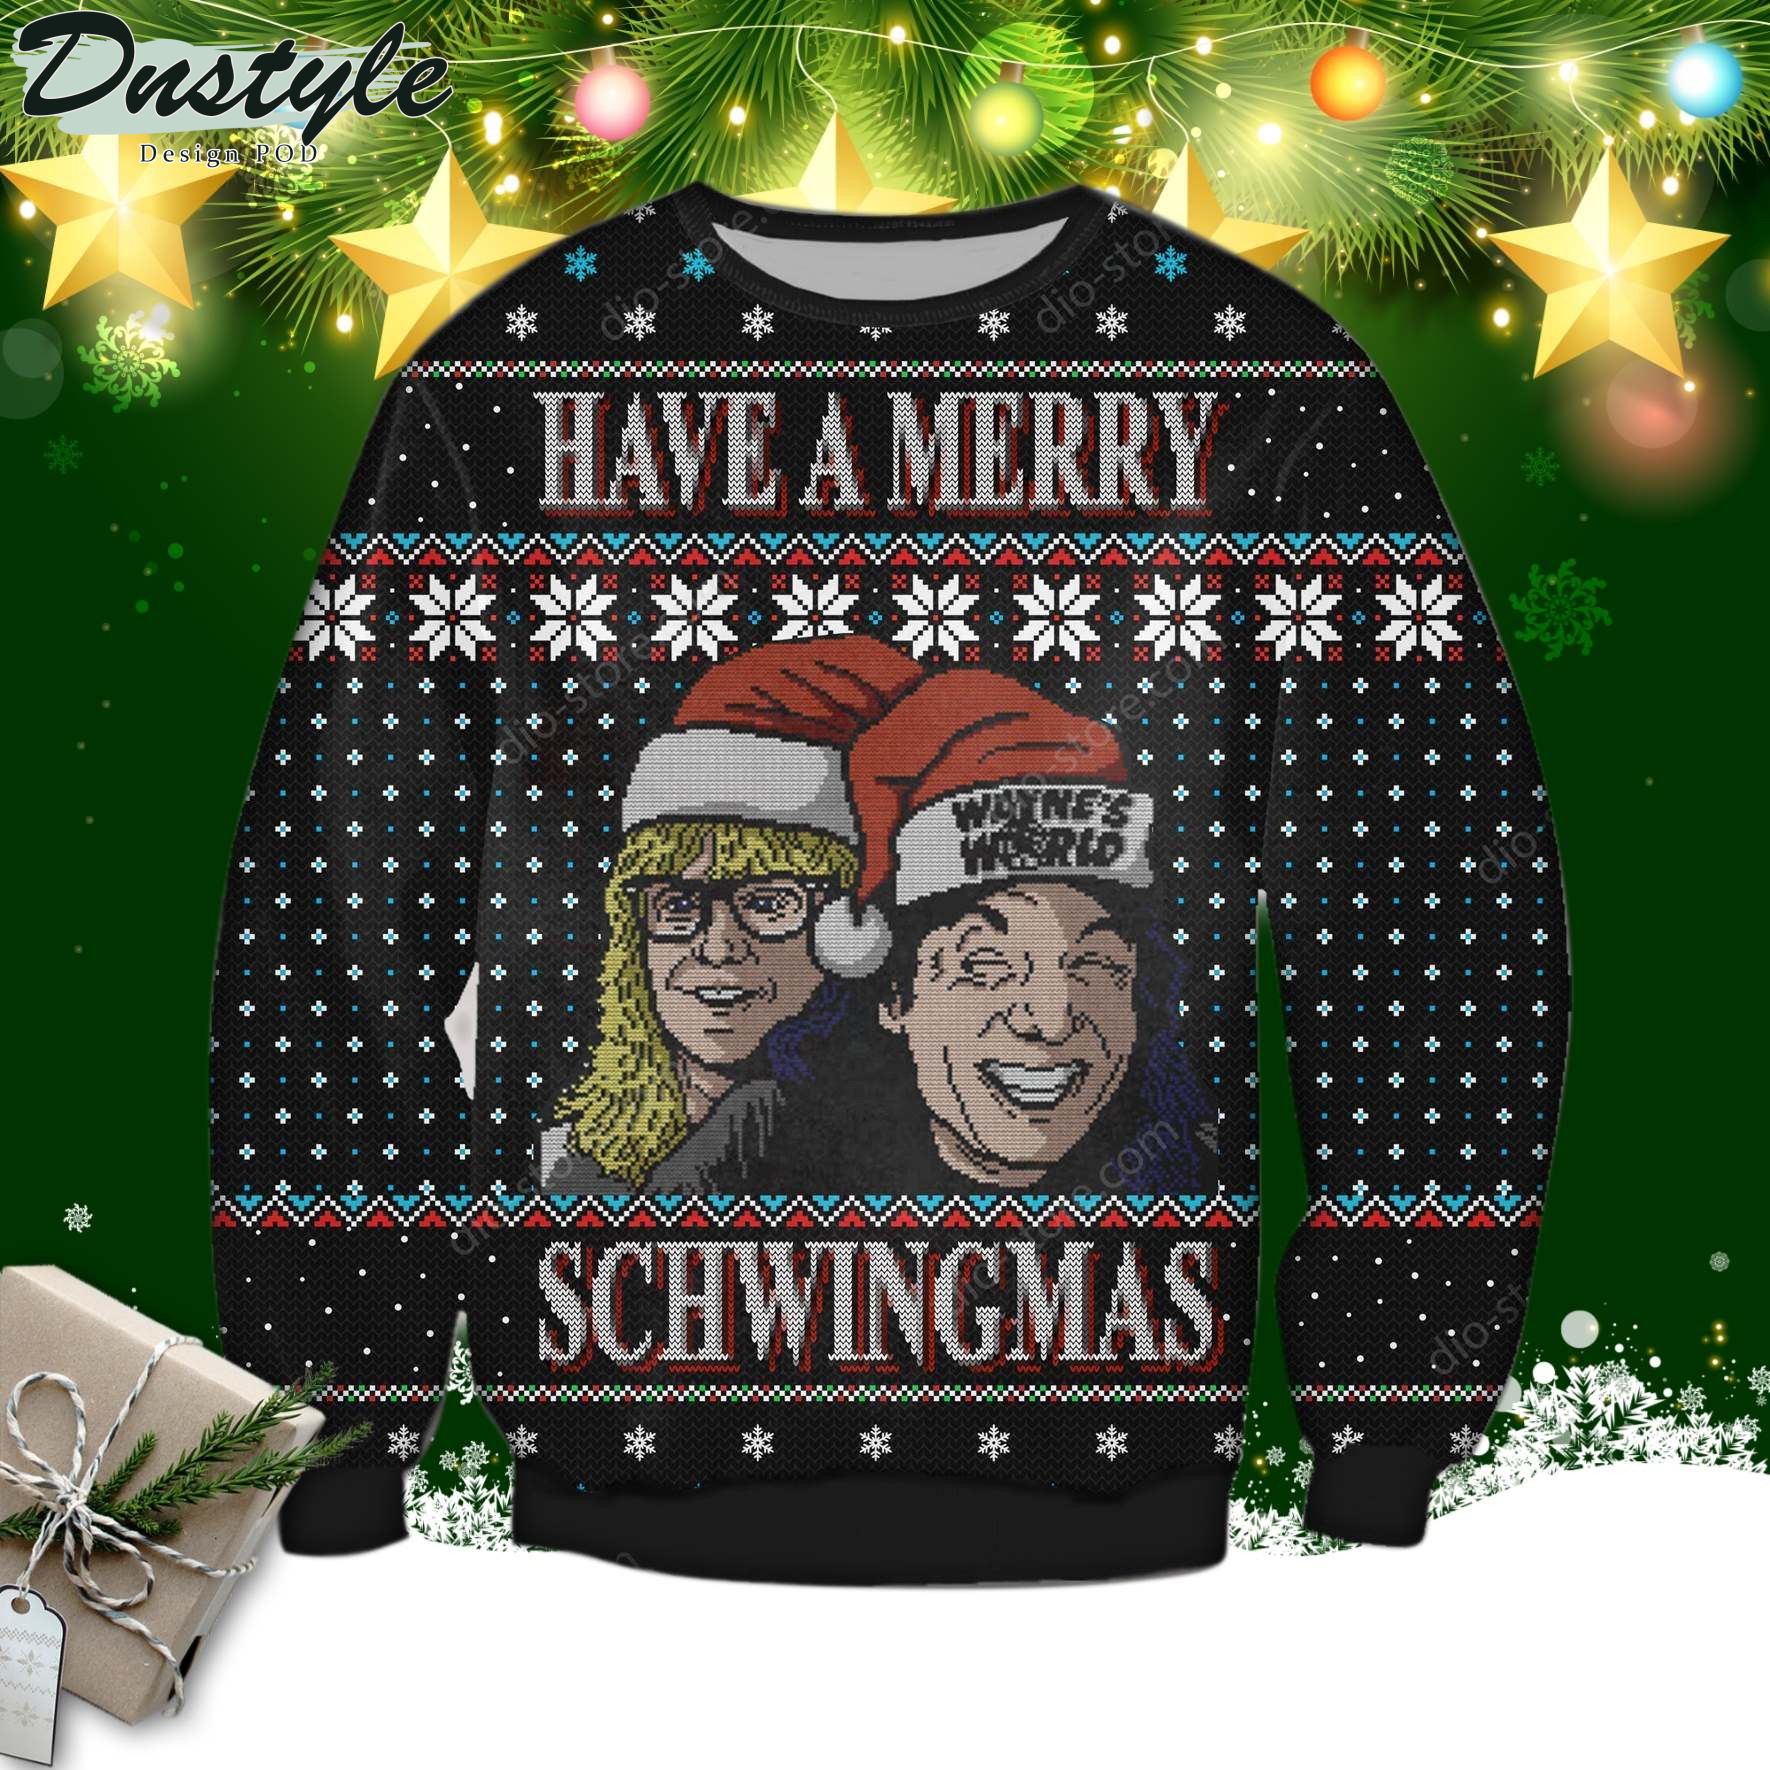 Schitt Is Creek Happy Holiday From One Schitt To Another Ugly Christmas Sweater